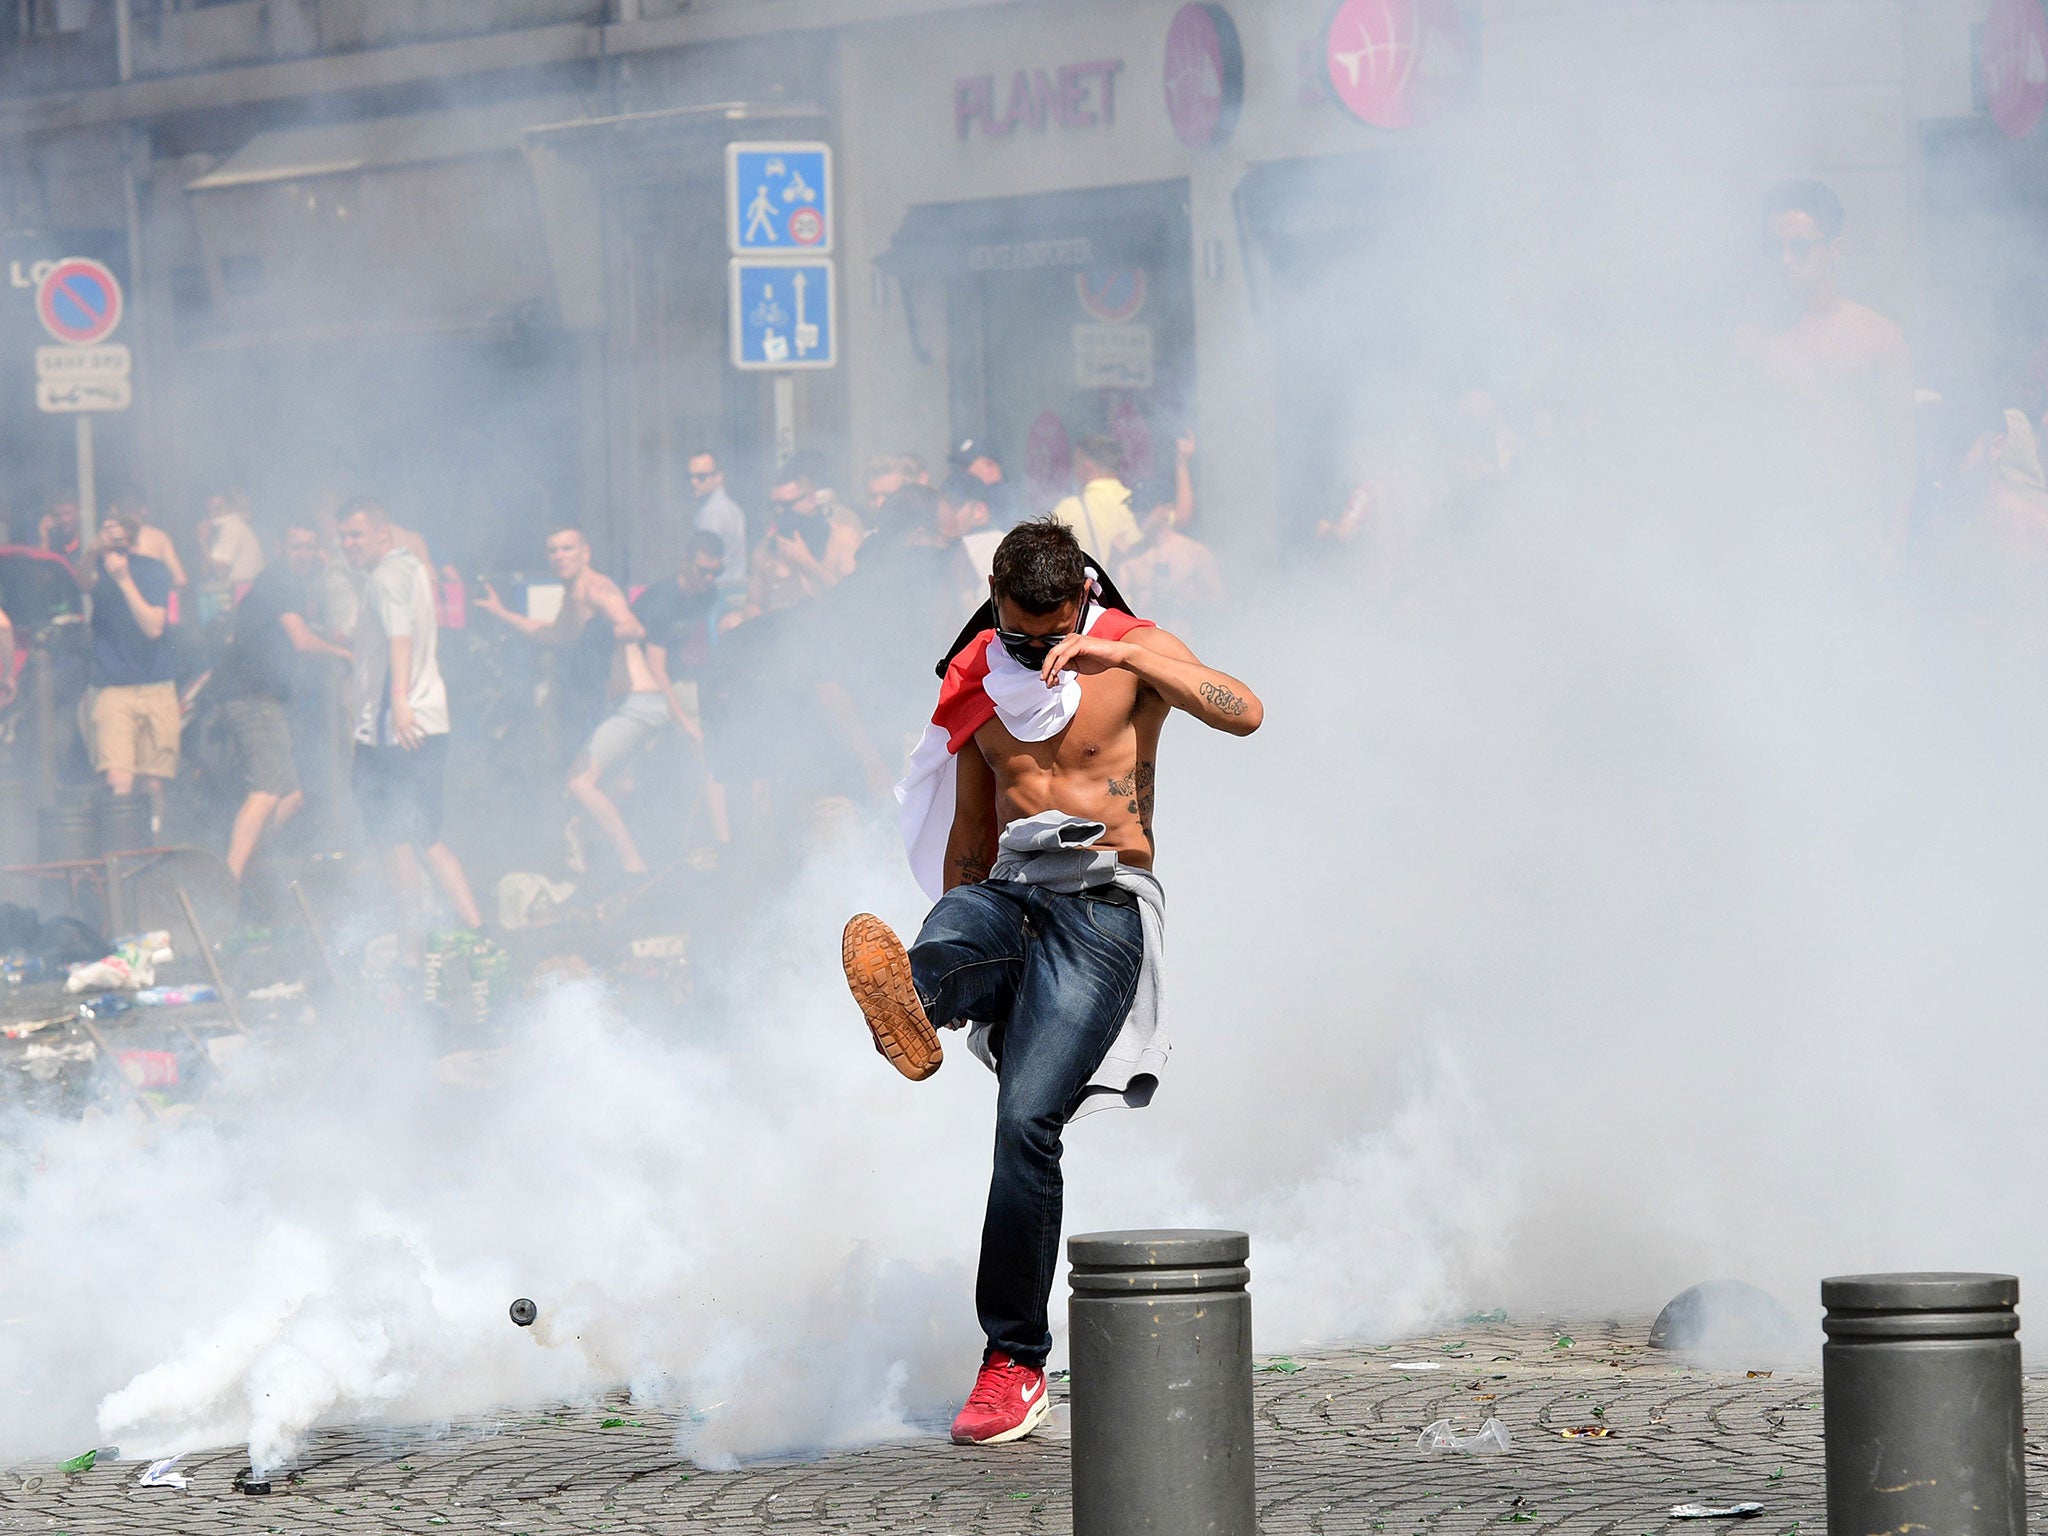 An England fan kicks away a tear gas canister after tear gas was released by French police in the city of Marseille, southern France, on June 11, 2016 (AFP/Getty Images)